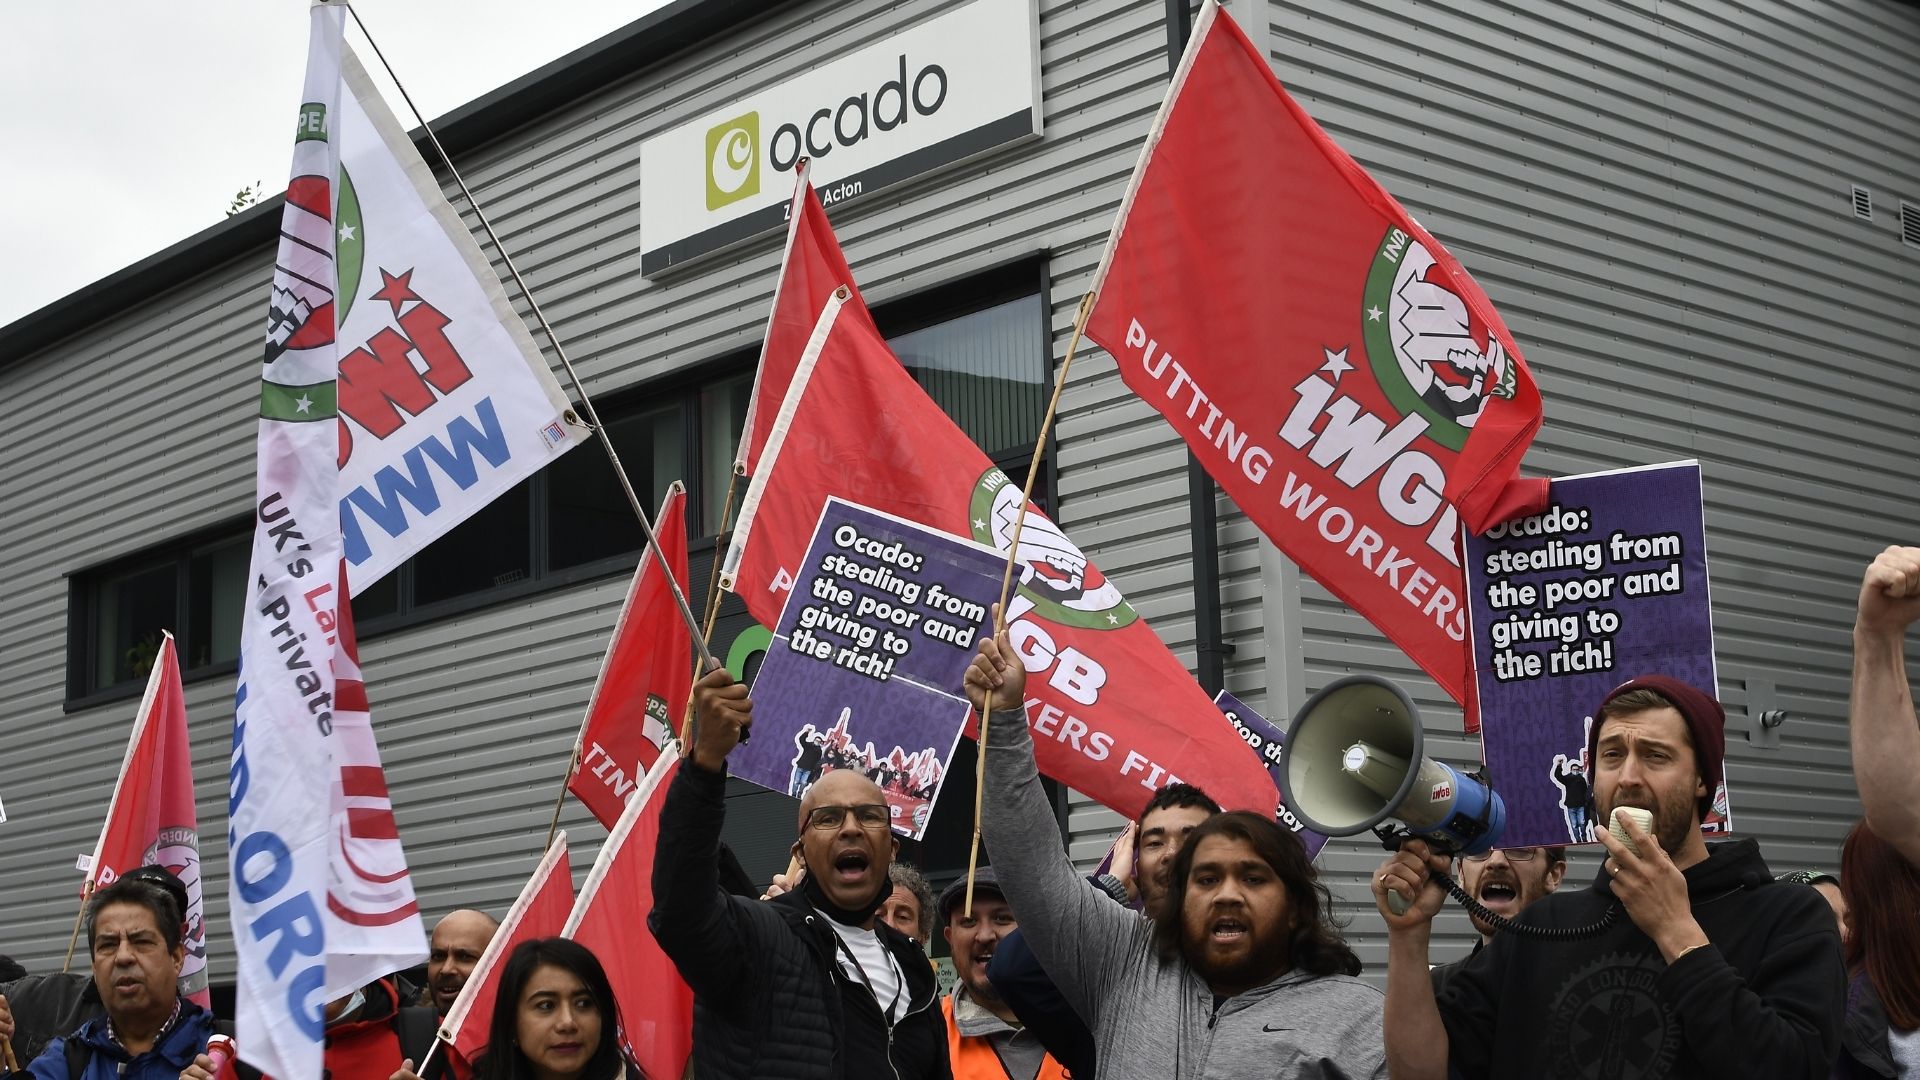 Ocado Zoom workers protest outside the company's depot in Acton. Image: IWGB